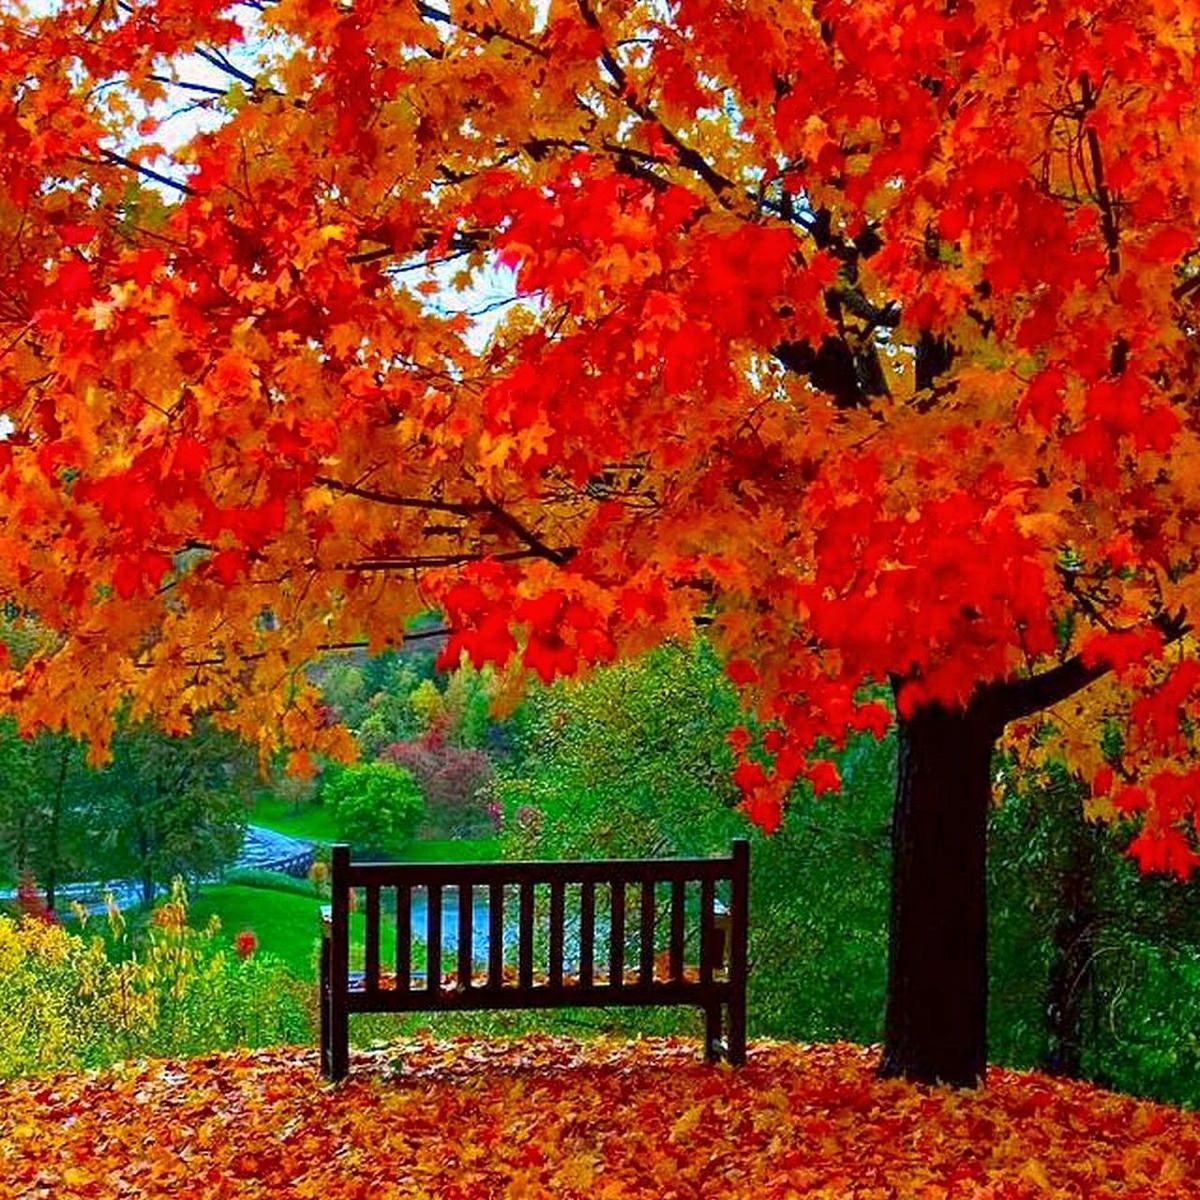 tree, autumn, change, season, beauty in nature, tranquility, bench, growth, nature, orange color, tranquil scene, scenics, park - man made space, branch, railing, flower, park bench, park, leaf, red